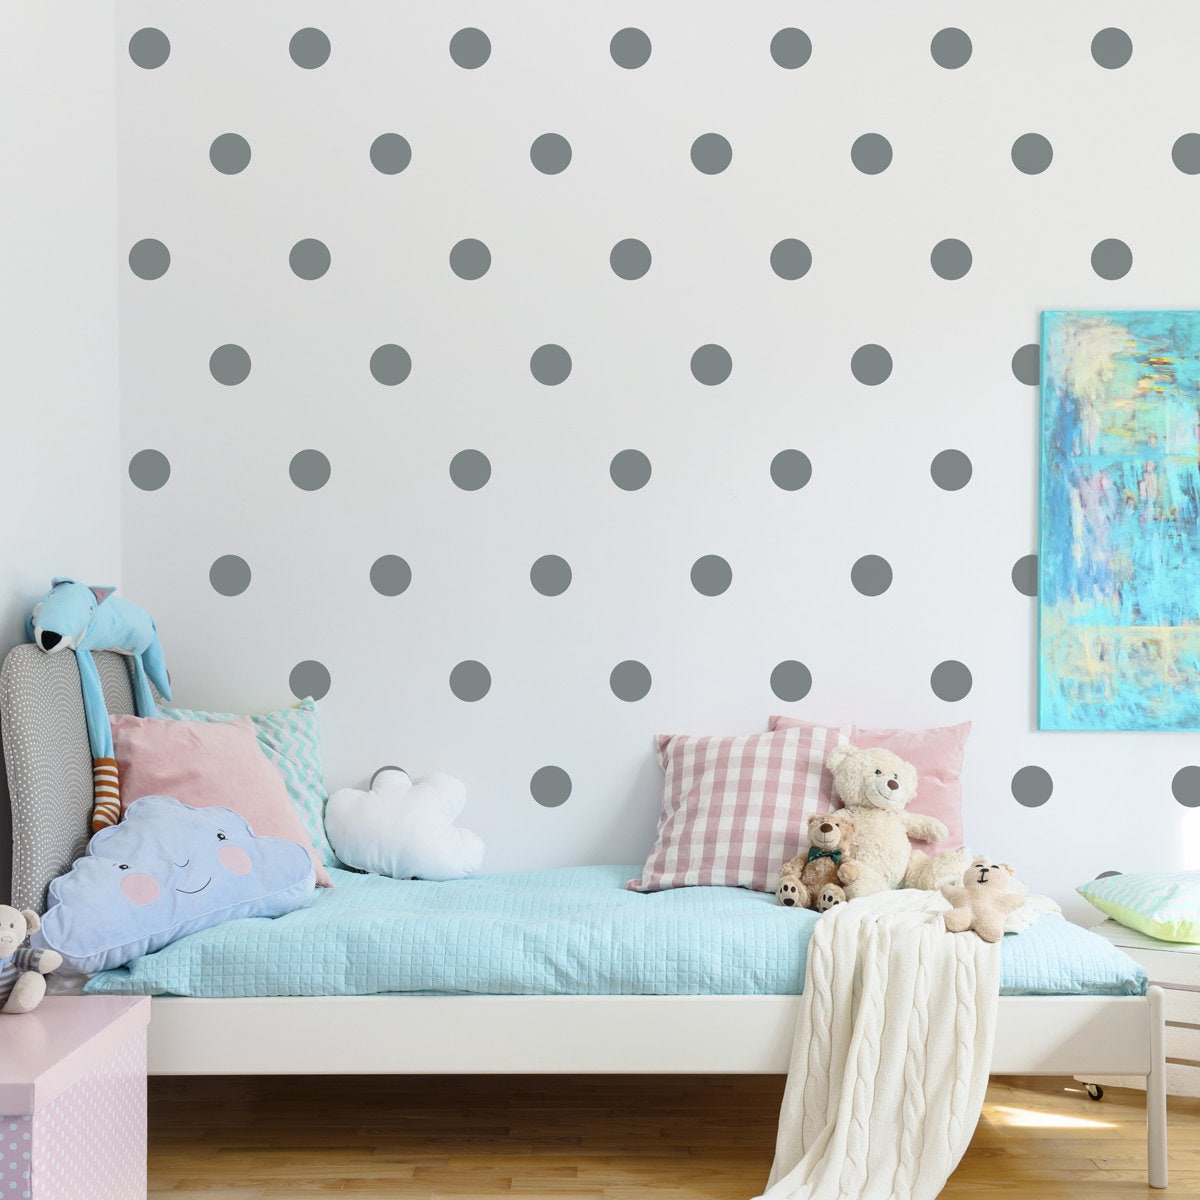 Dot Wall Decal Set - Set of 105 Polka Dot Decals - Office Decor - Bedroom Stickers - Multiple Sizes Available